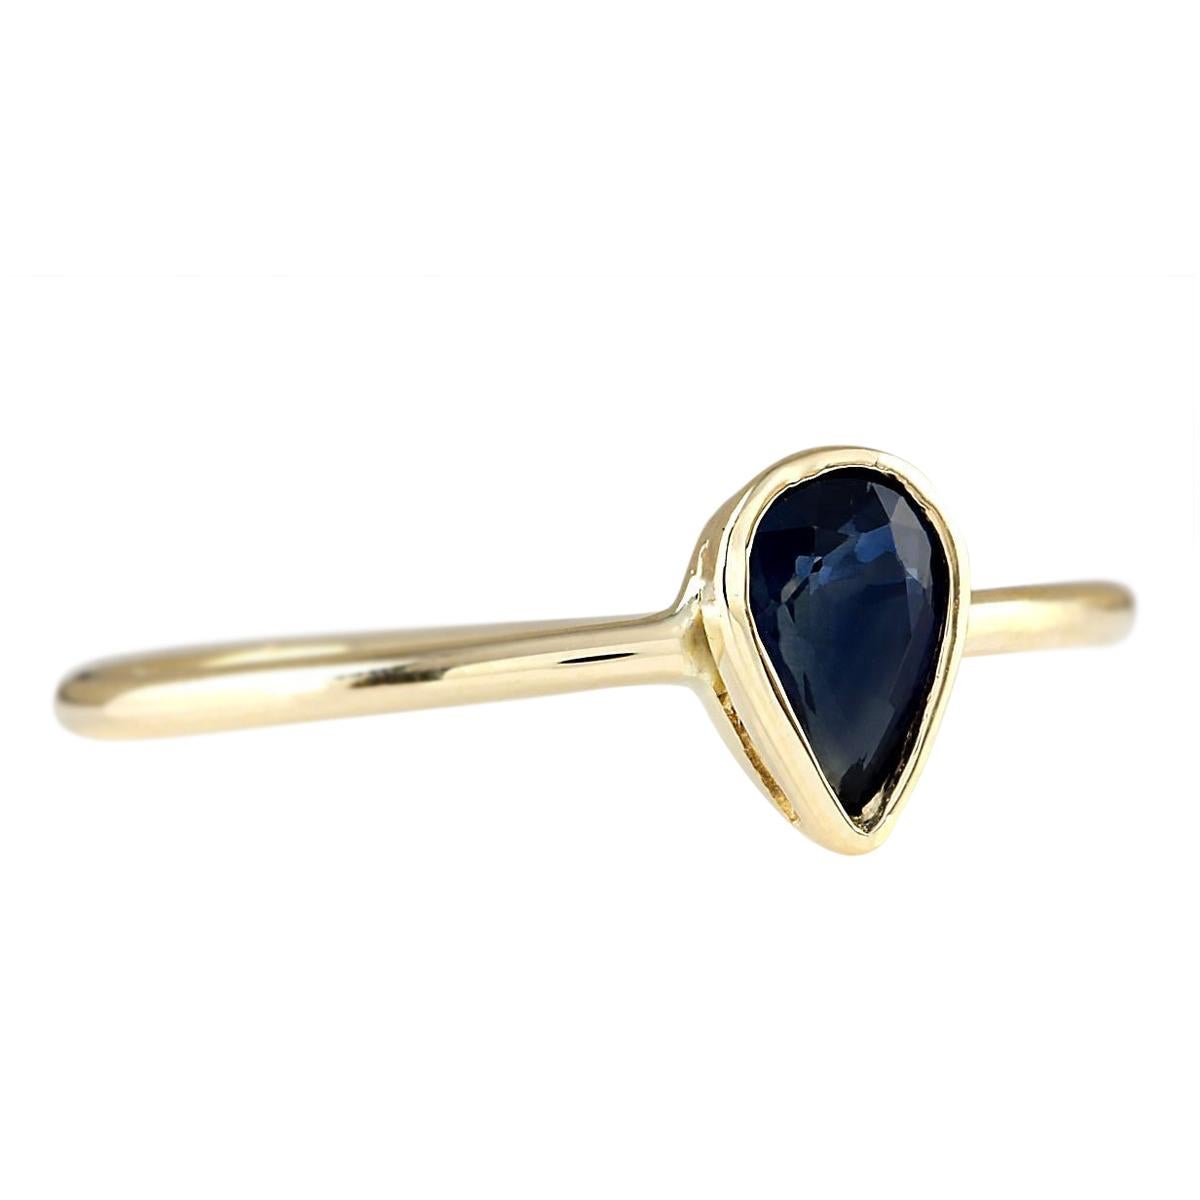 Stamped: 14K Yellow Gold
Total Ring Weight: 1.2 Grams
Total Natural Sapphire Weight is 0.52 Carat
Color: Blue
Face Measures: 6.00x4.00 mm
Sku: [703383W]